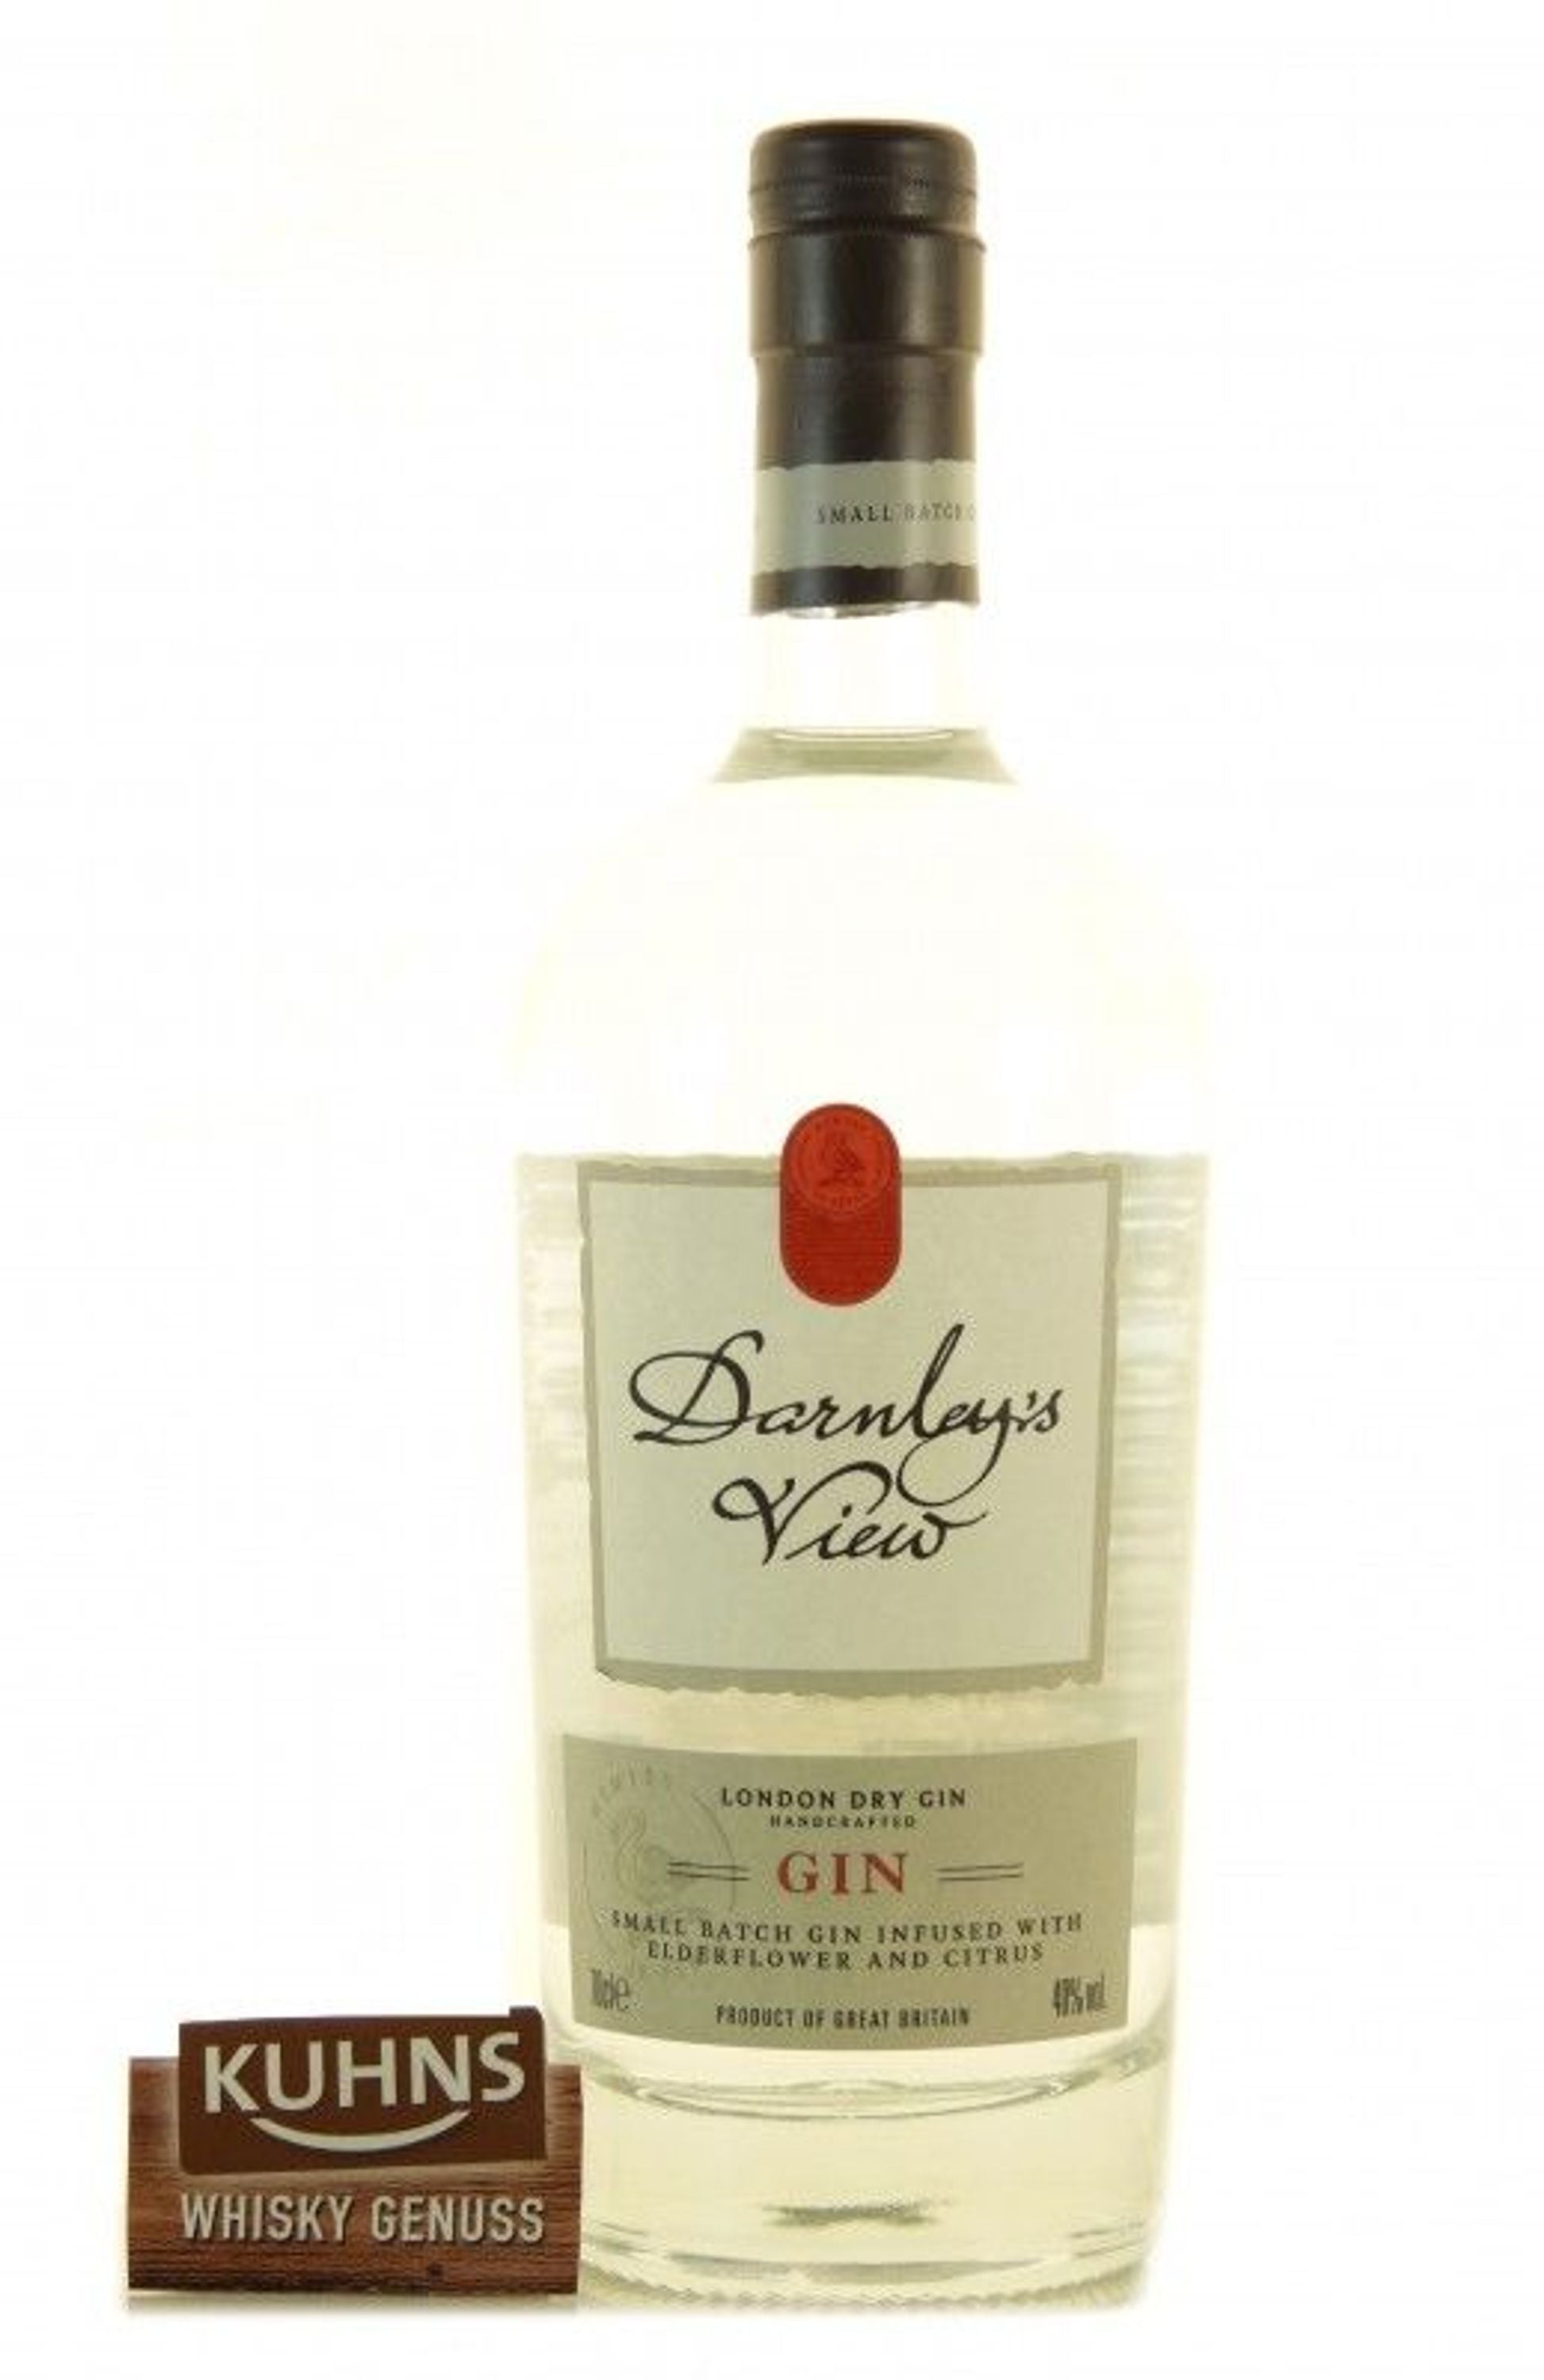 Darnley's View London Dry Gin 0.7l, alc. 40% ABV Dry Gin England